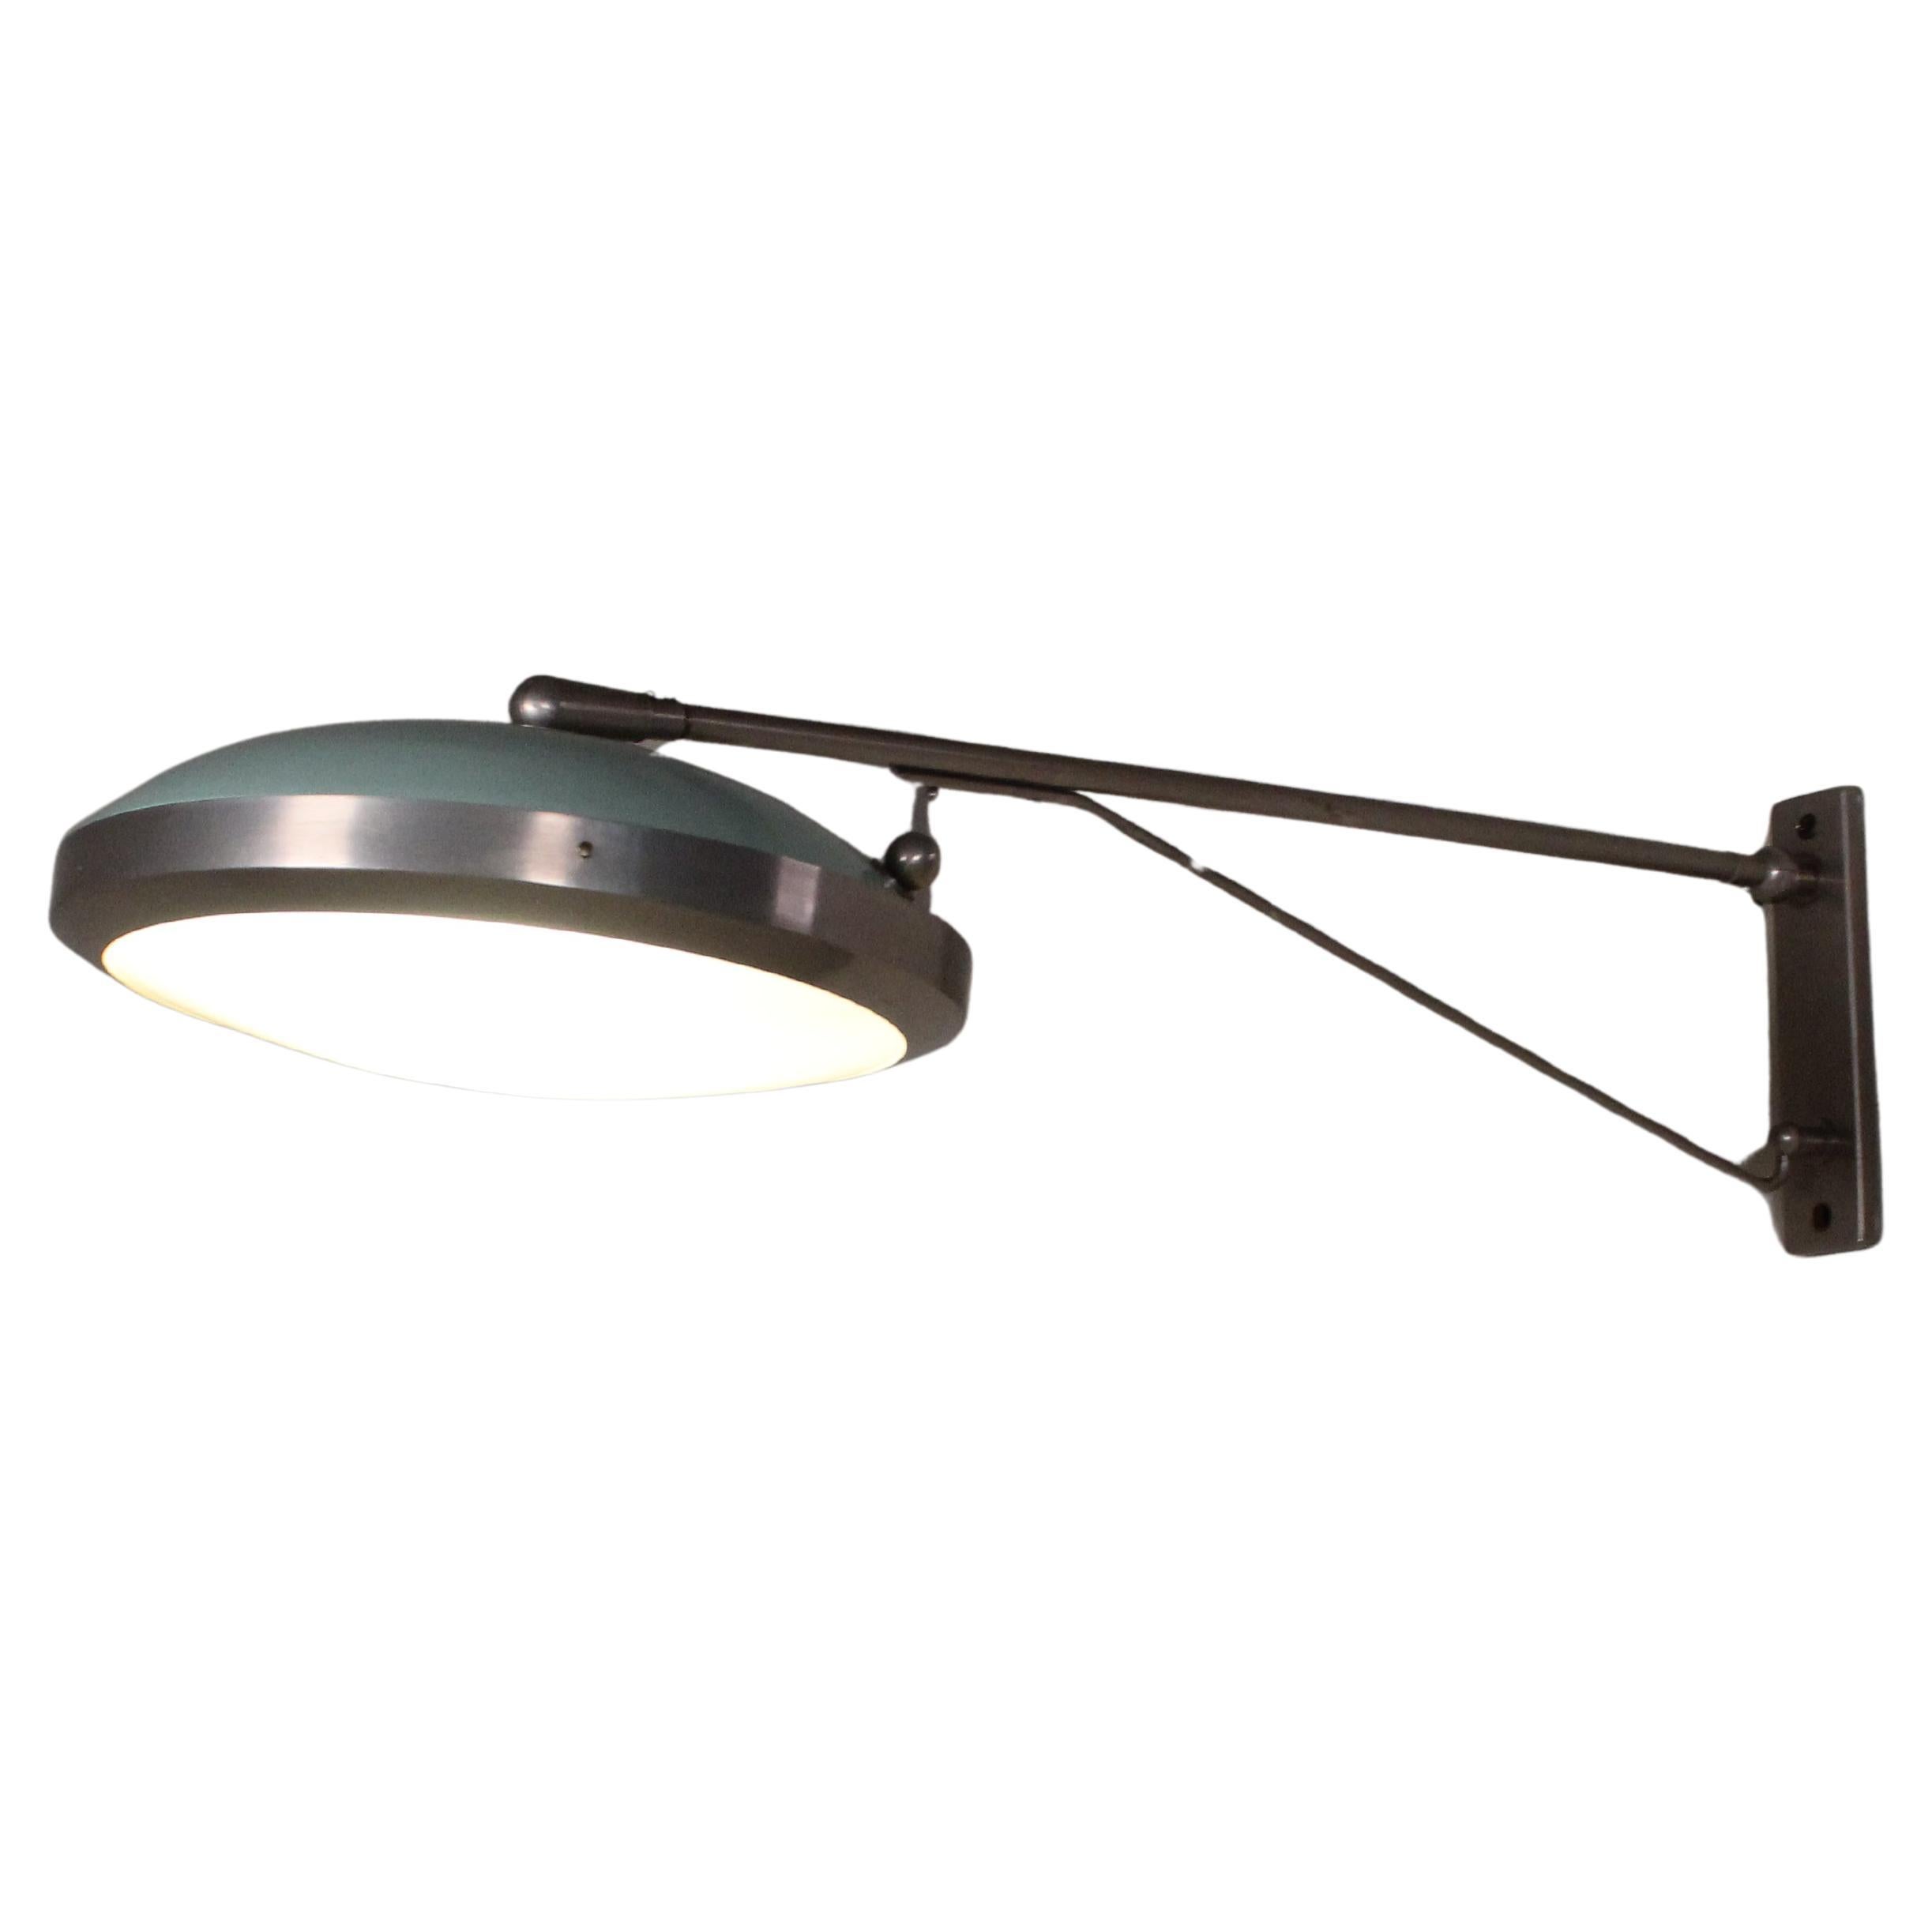 Glass and steel wall sconce, green, Stilnovo For Sale